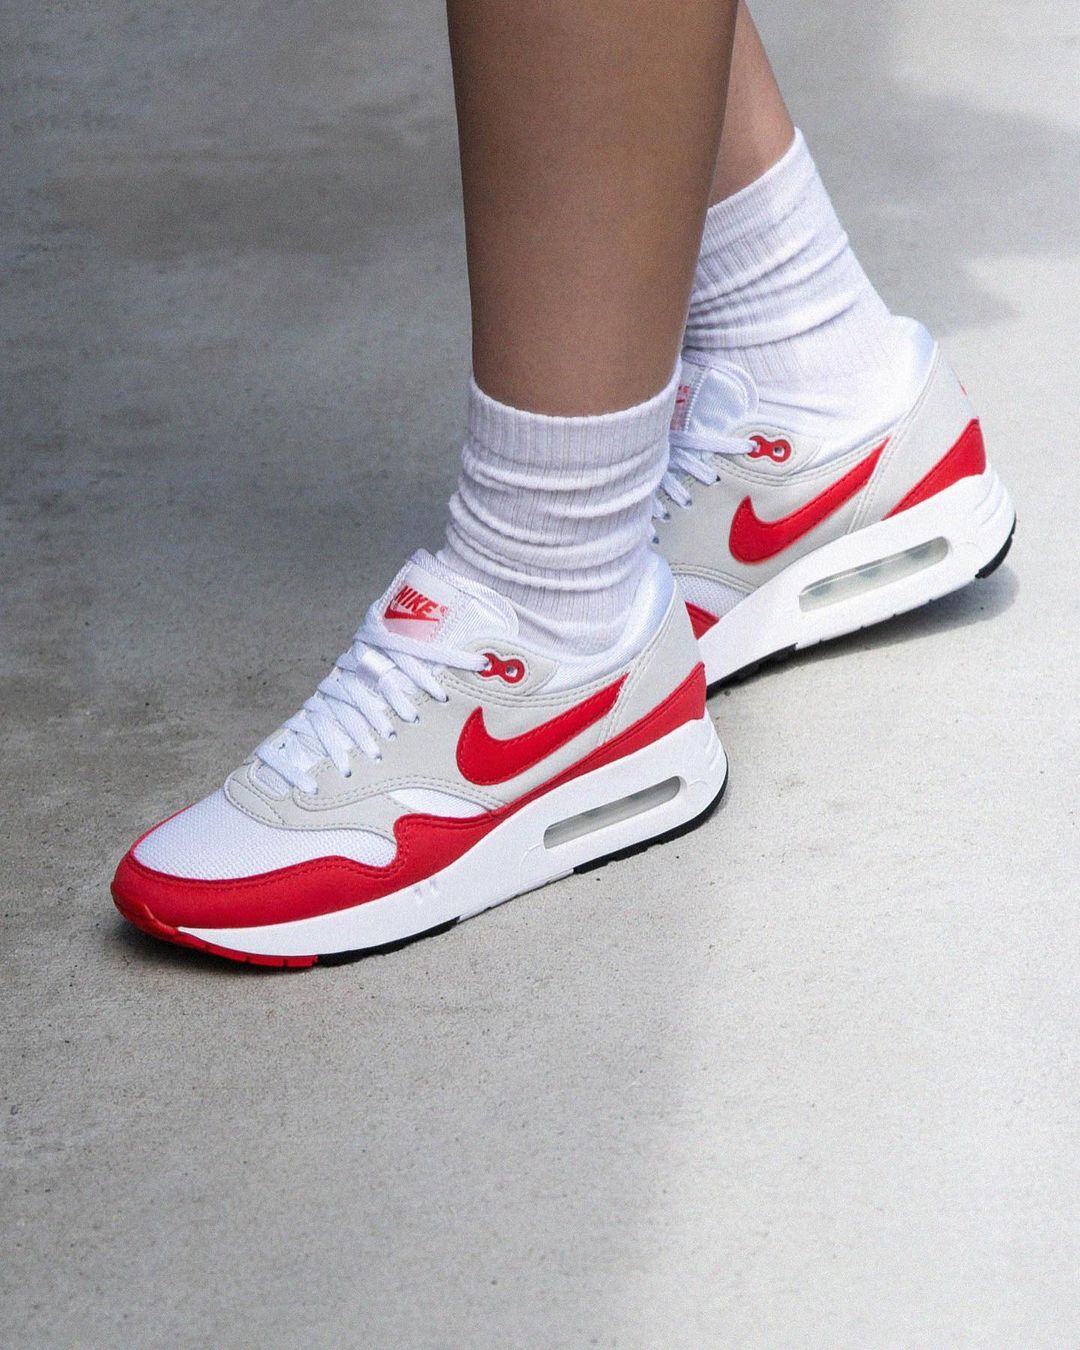 Sneaker News on Twitter: "If you a "W" on the "Big Bubble" pair, will it be your time owning the original Nike Air Max 1? 🫧 https://t.co/jkVAsZF6yM" / Twitter